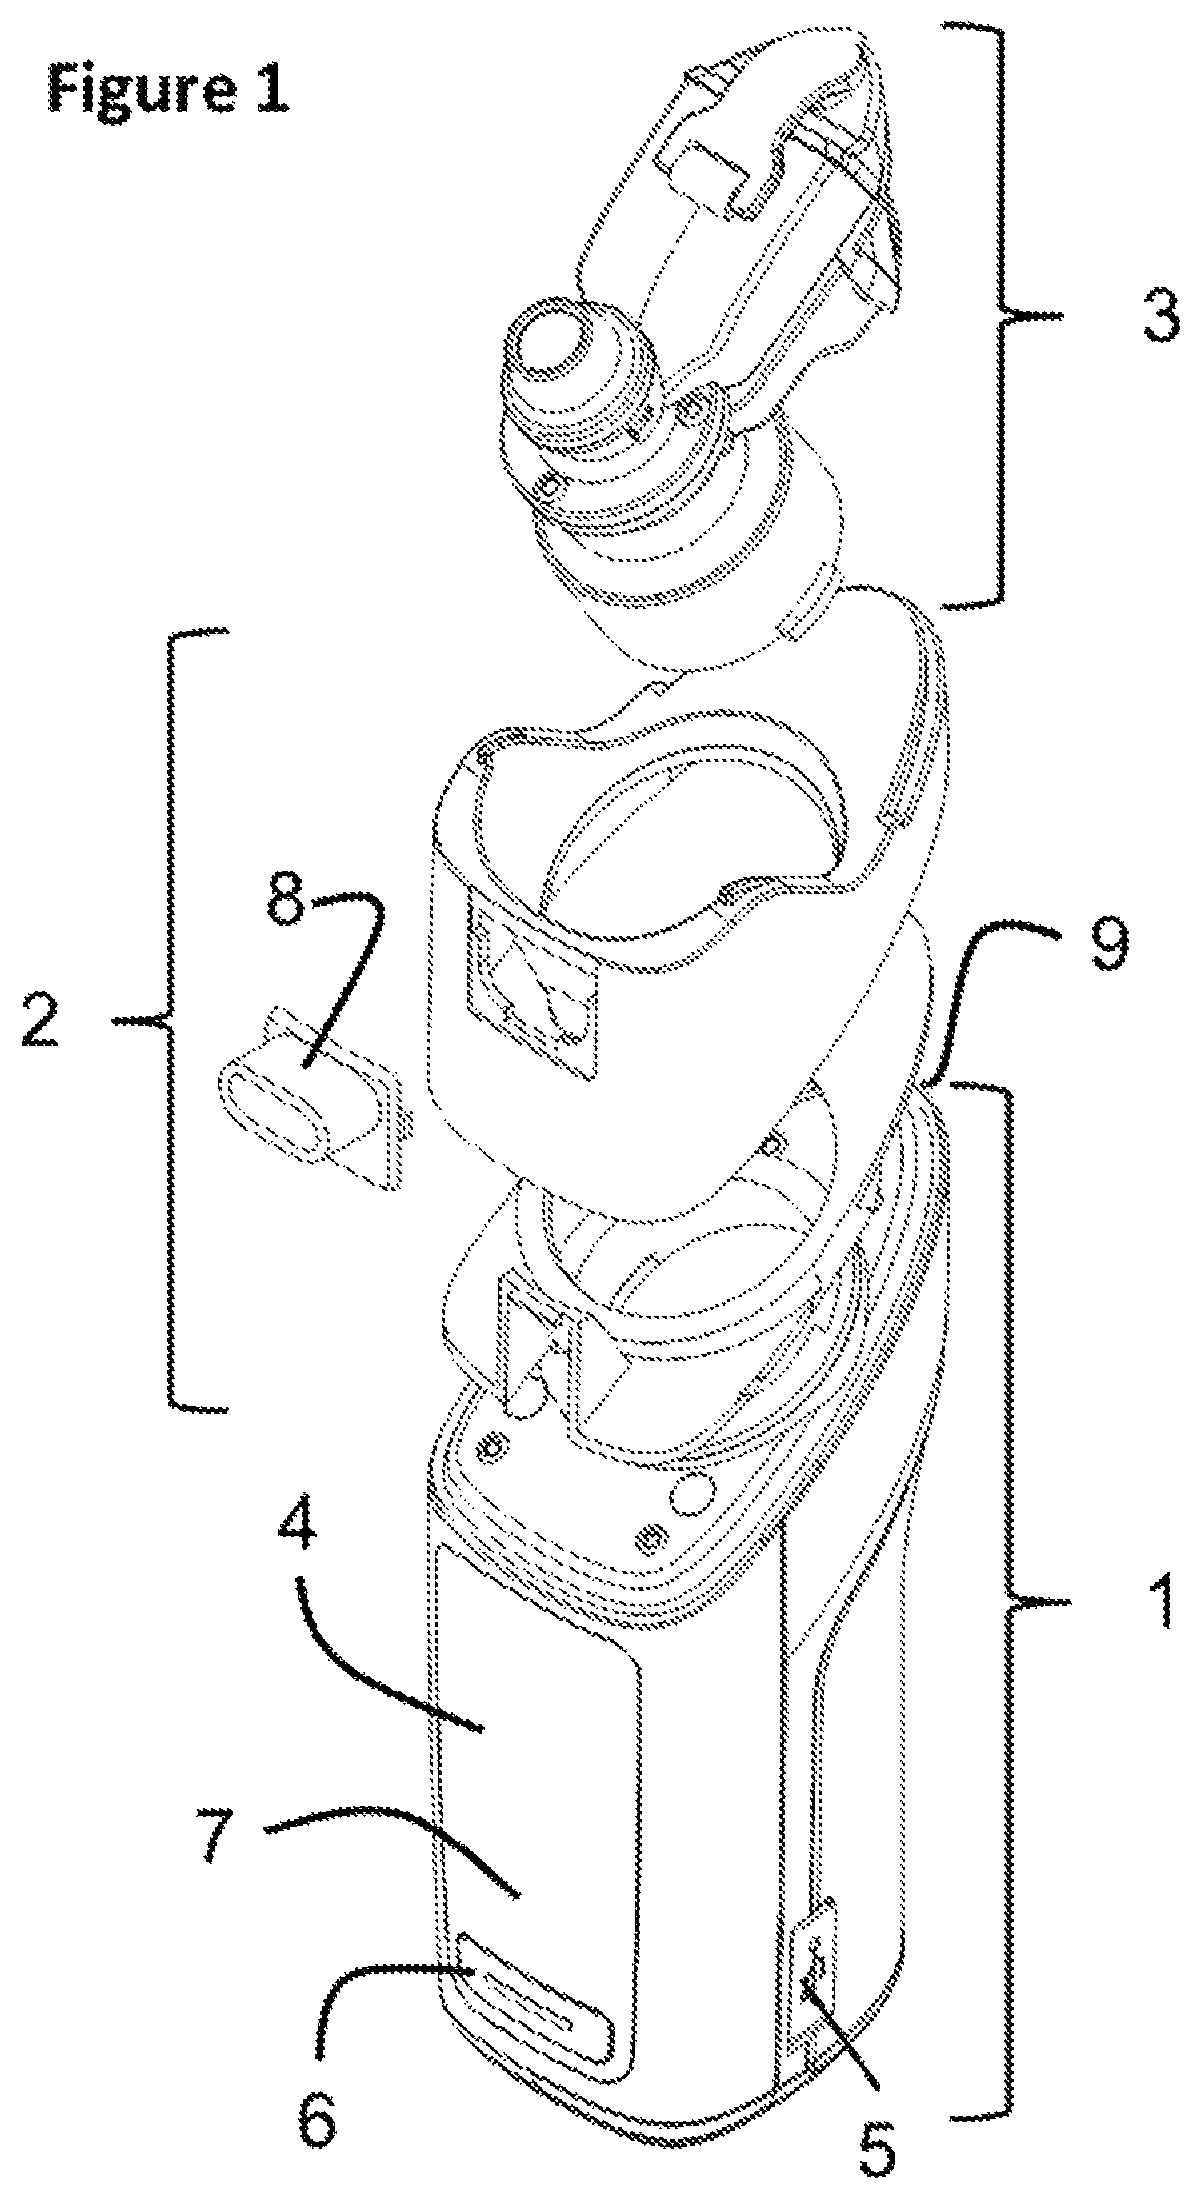 Nasal medication delivery device